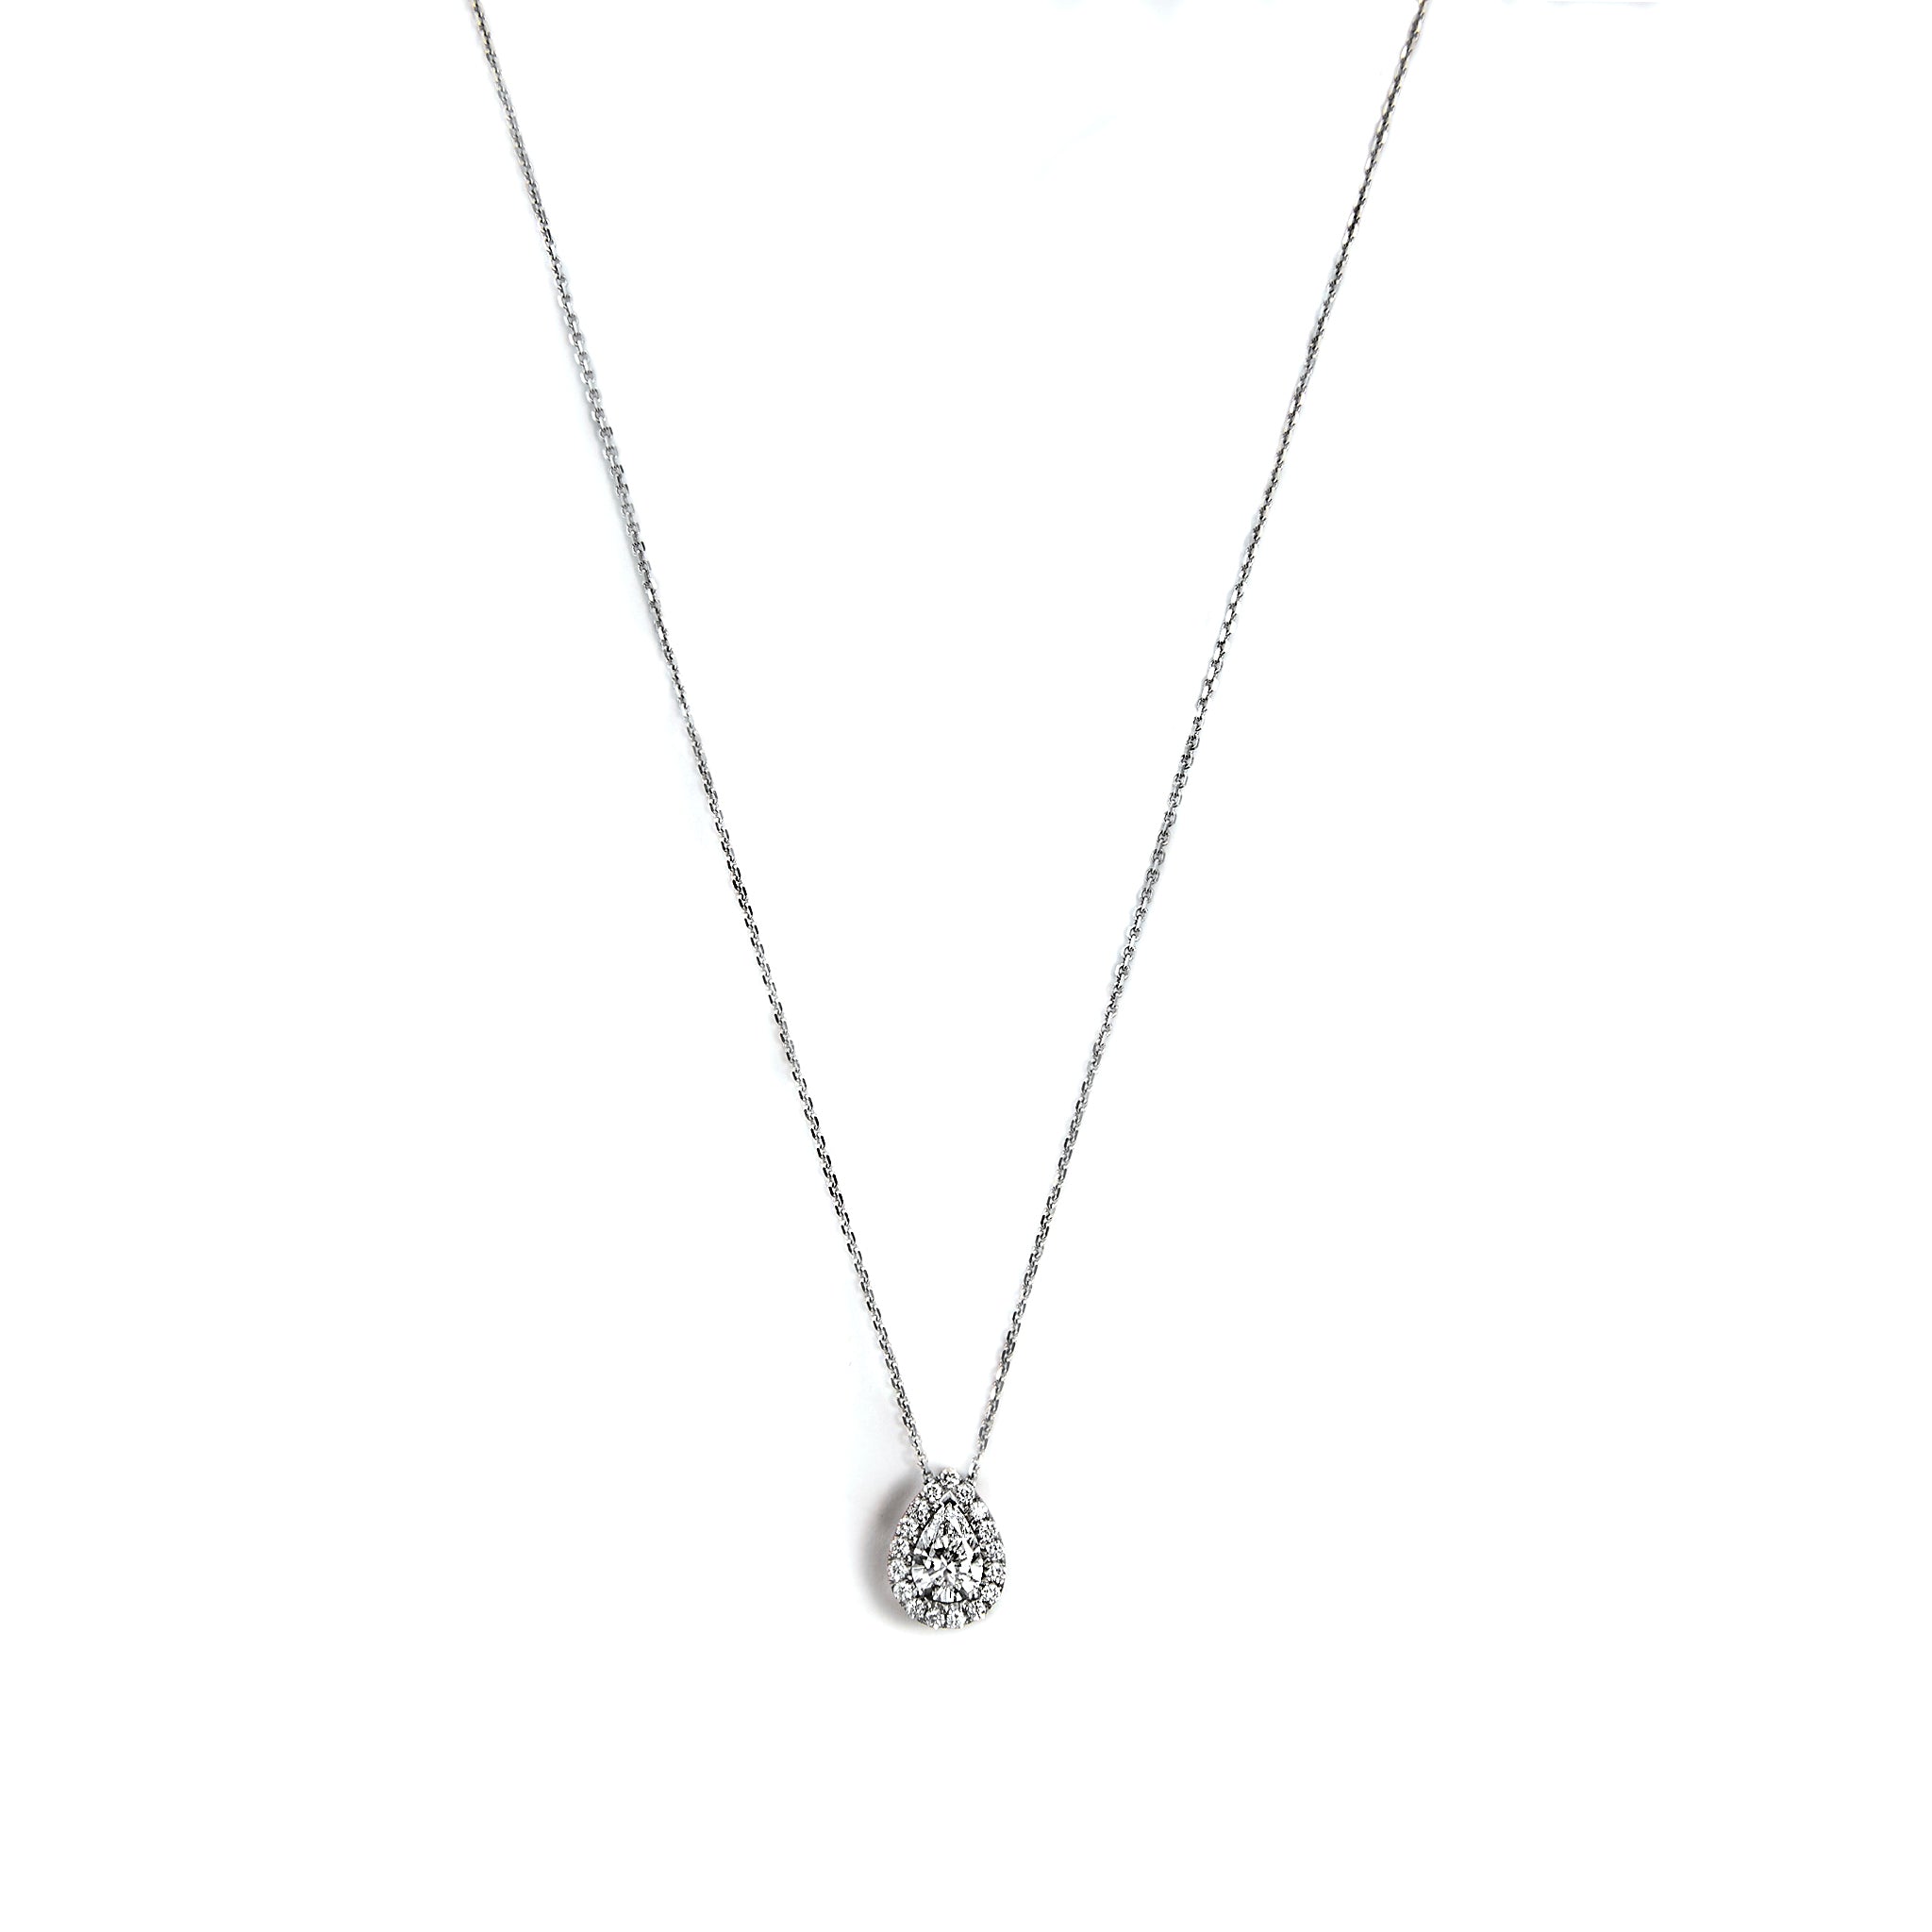 Exquisite 18k White Gold Pendant with Chain, symbolizing elegance and sophistication. Crafted with precision and adorned with sparkling diamonds. Material: 18k white gold. Pendant Measurements: 7.00 * 4.80 mm. Estimated Total Diamond Weight: 0.55 carats. Color: Near Colorless (g-h). Clarity: VS1.